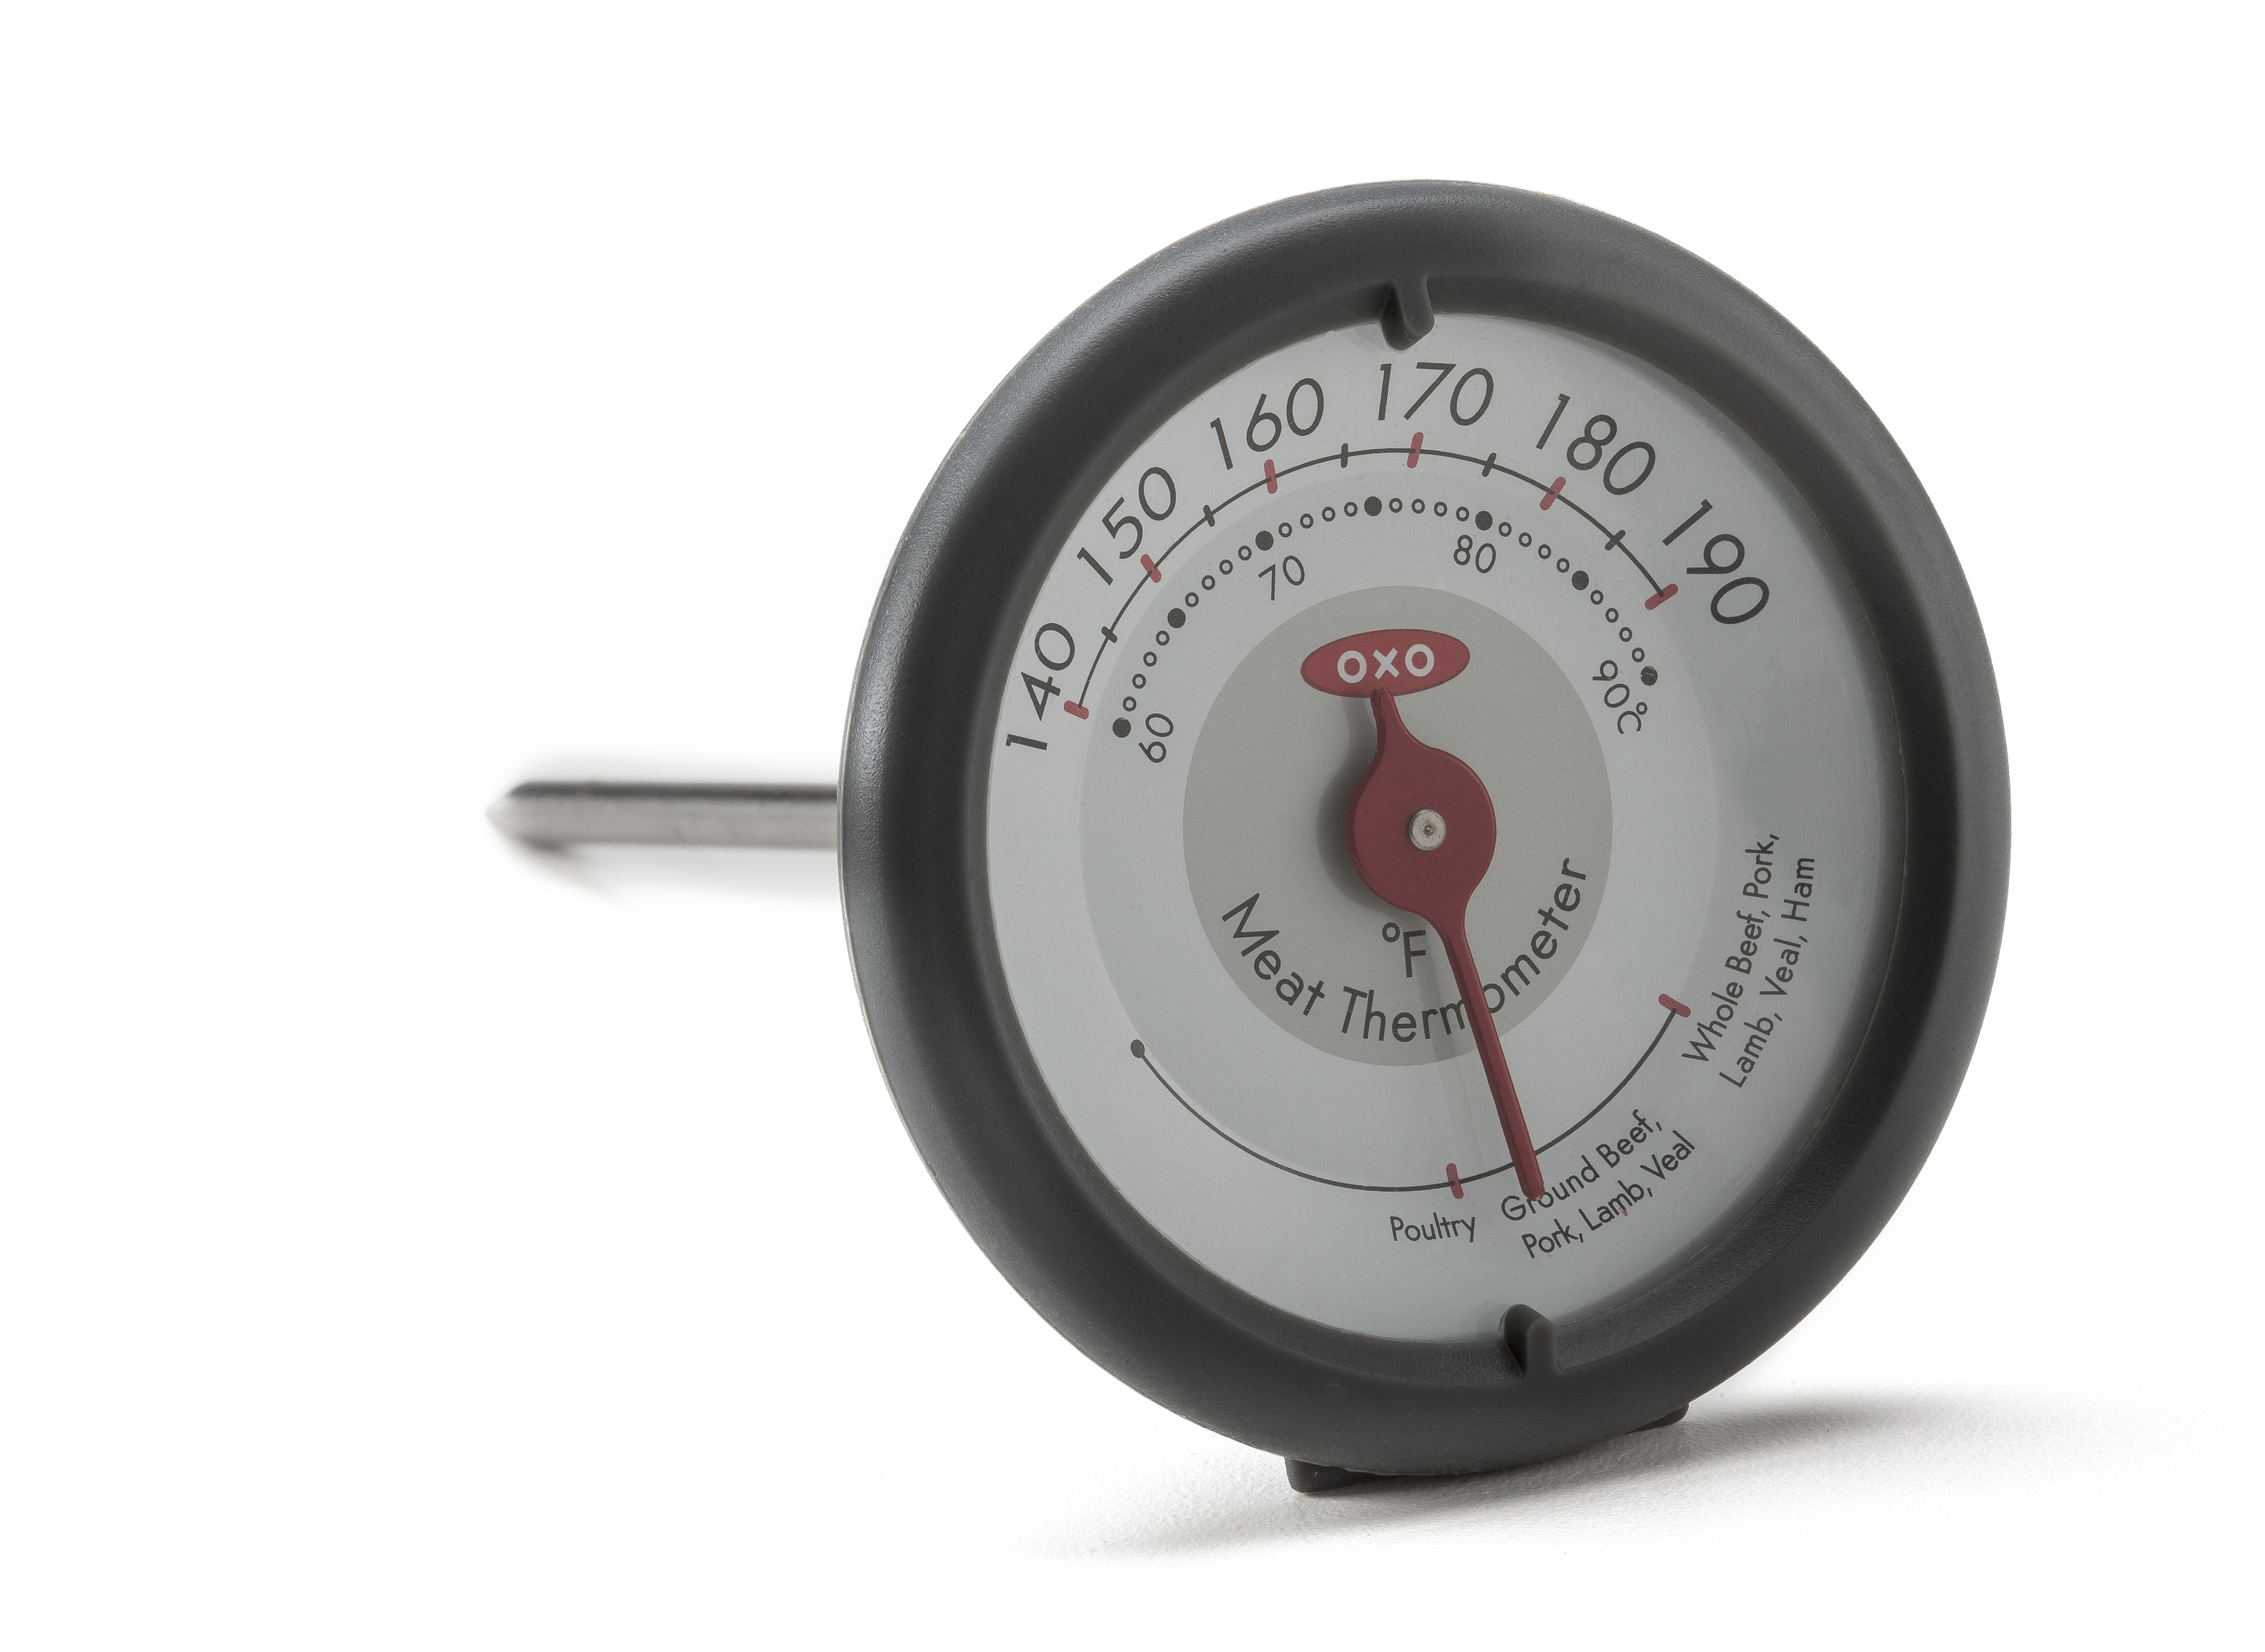 https://crdms.images.consumerreports.org/prod/products/cr/models/246598-meatthermometers-oxo-goodgrips1051105v3.png